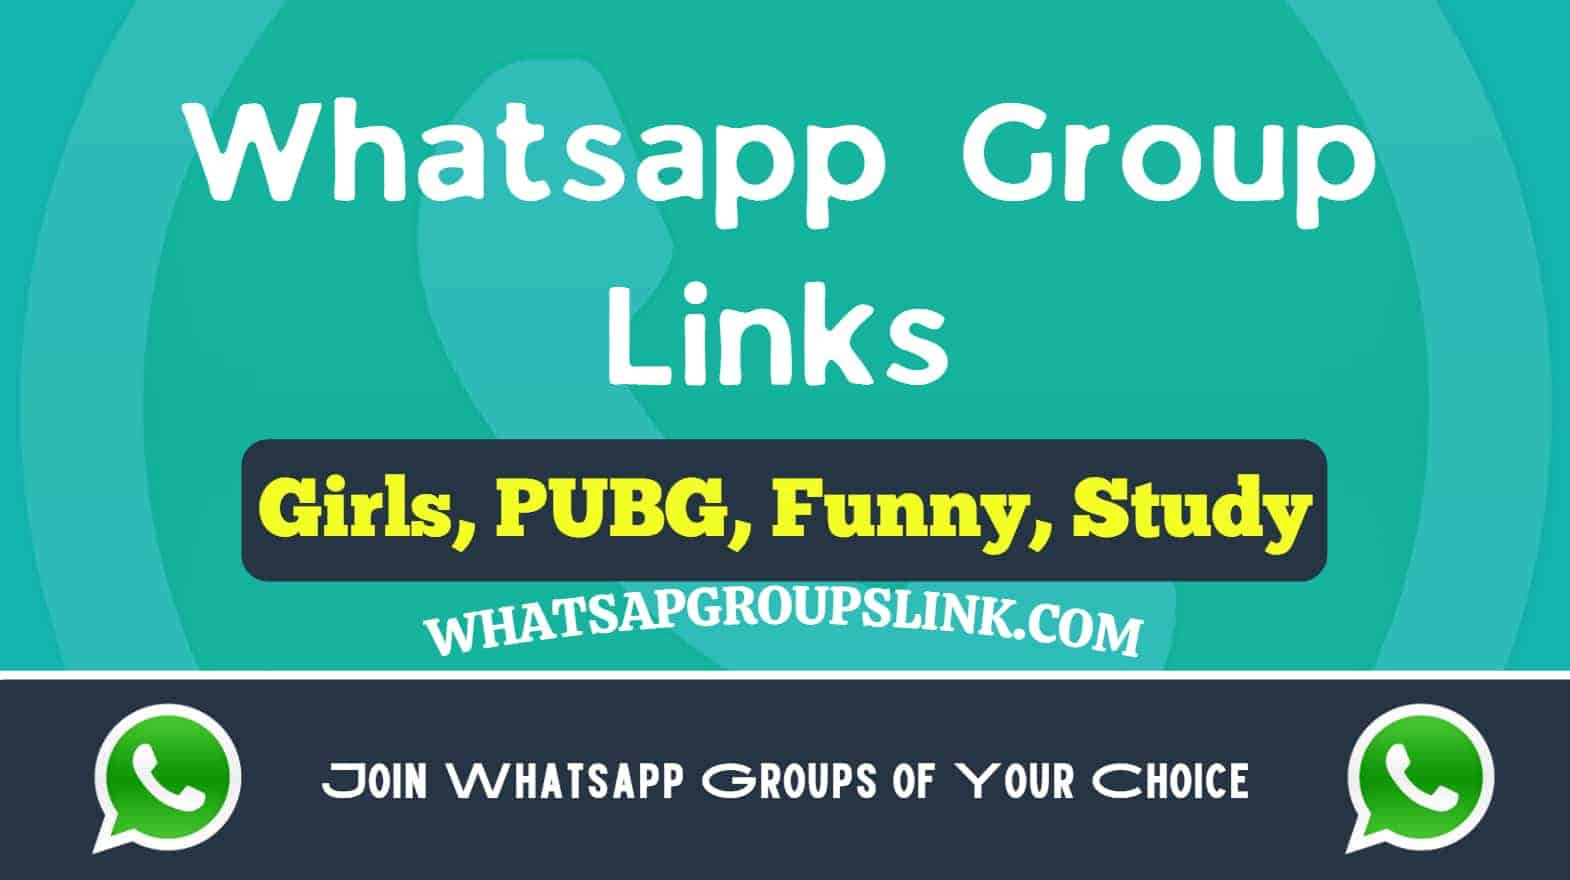 Whatsapp group link tag and two whatsapp icon on bottom